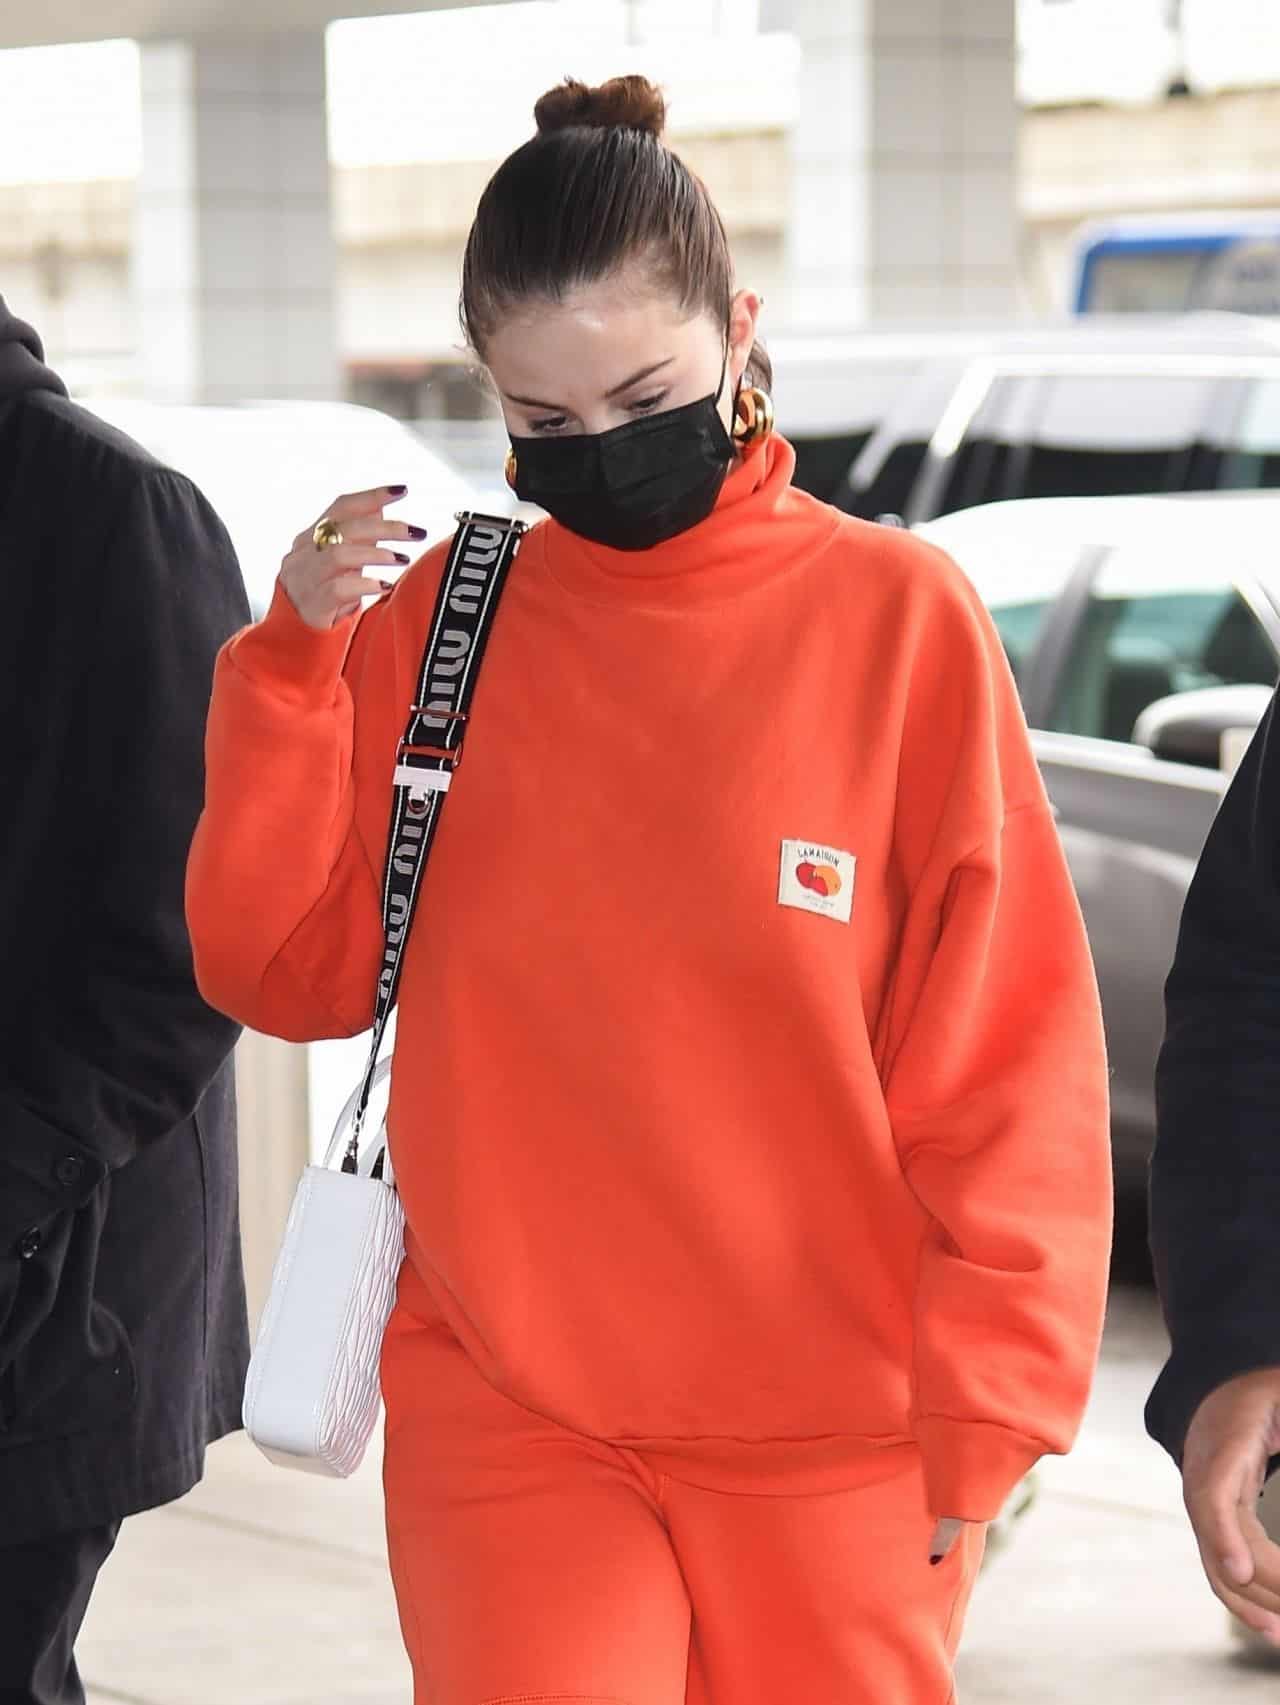 Selena Gomez Arrives at JFK Airport in an All-Orange Casual Outfit